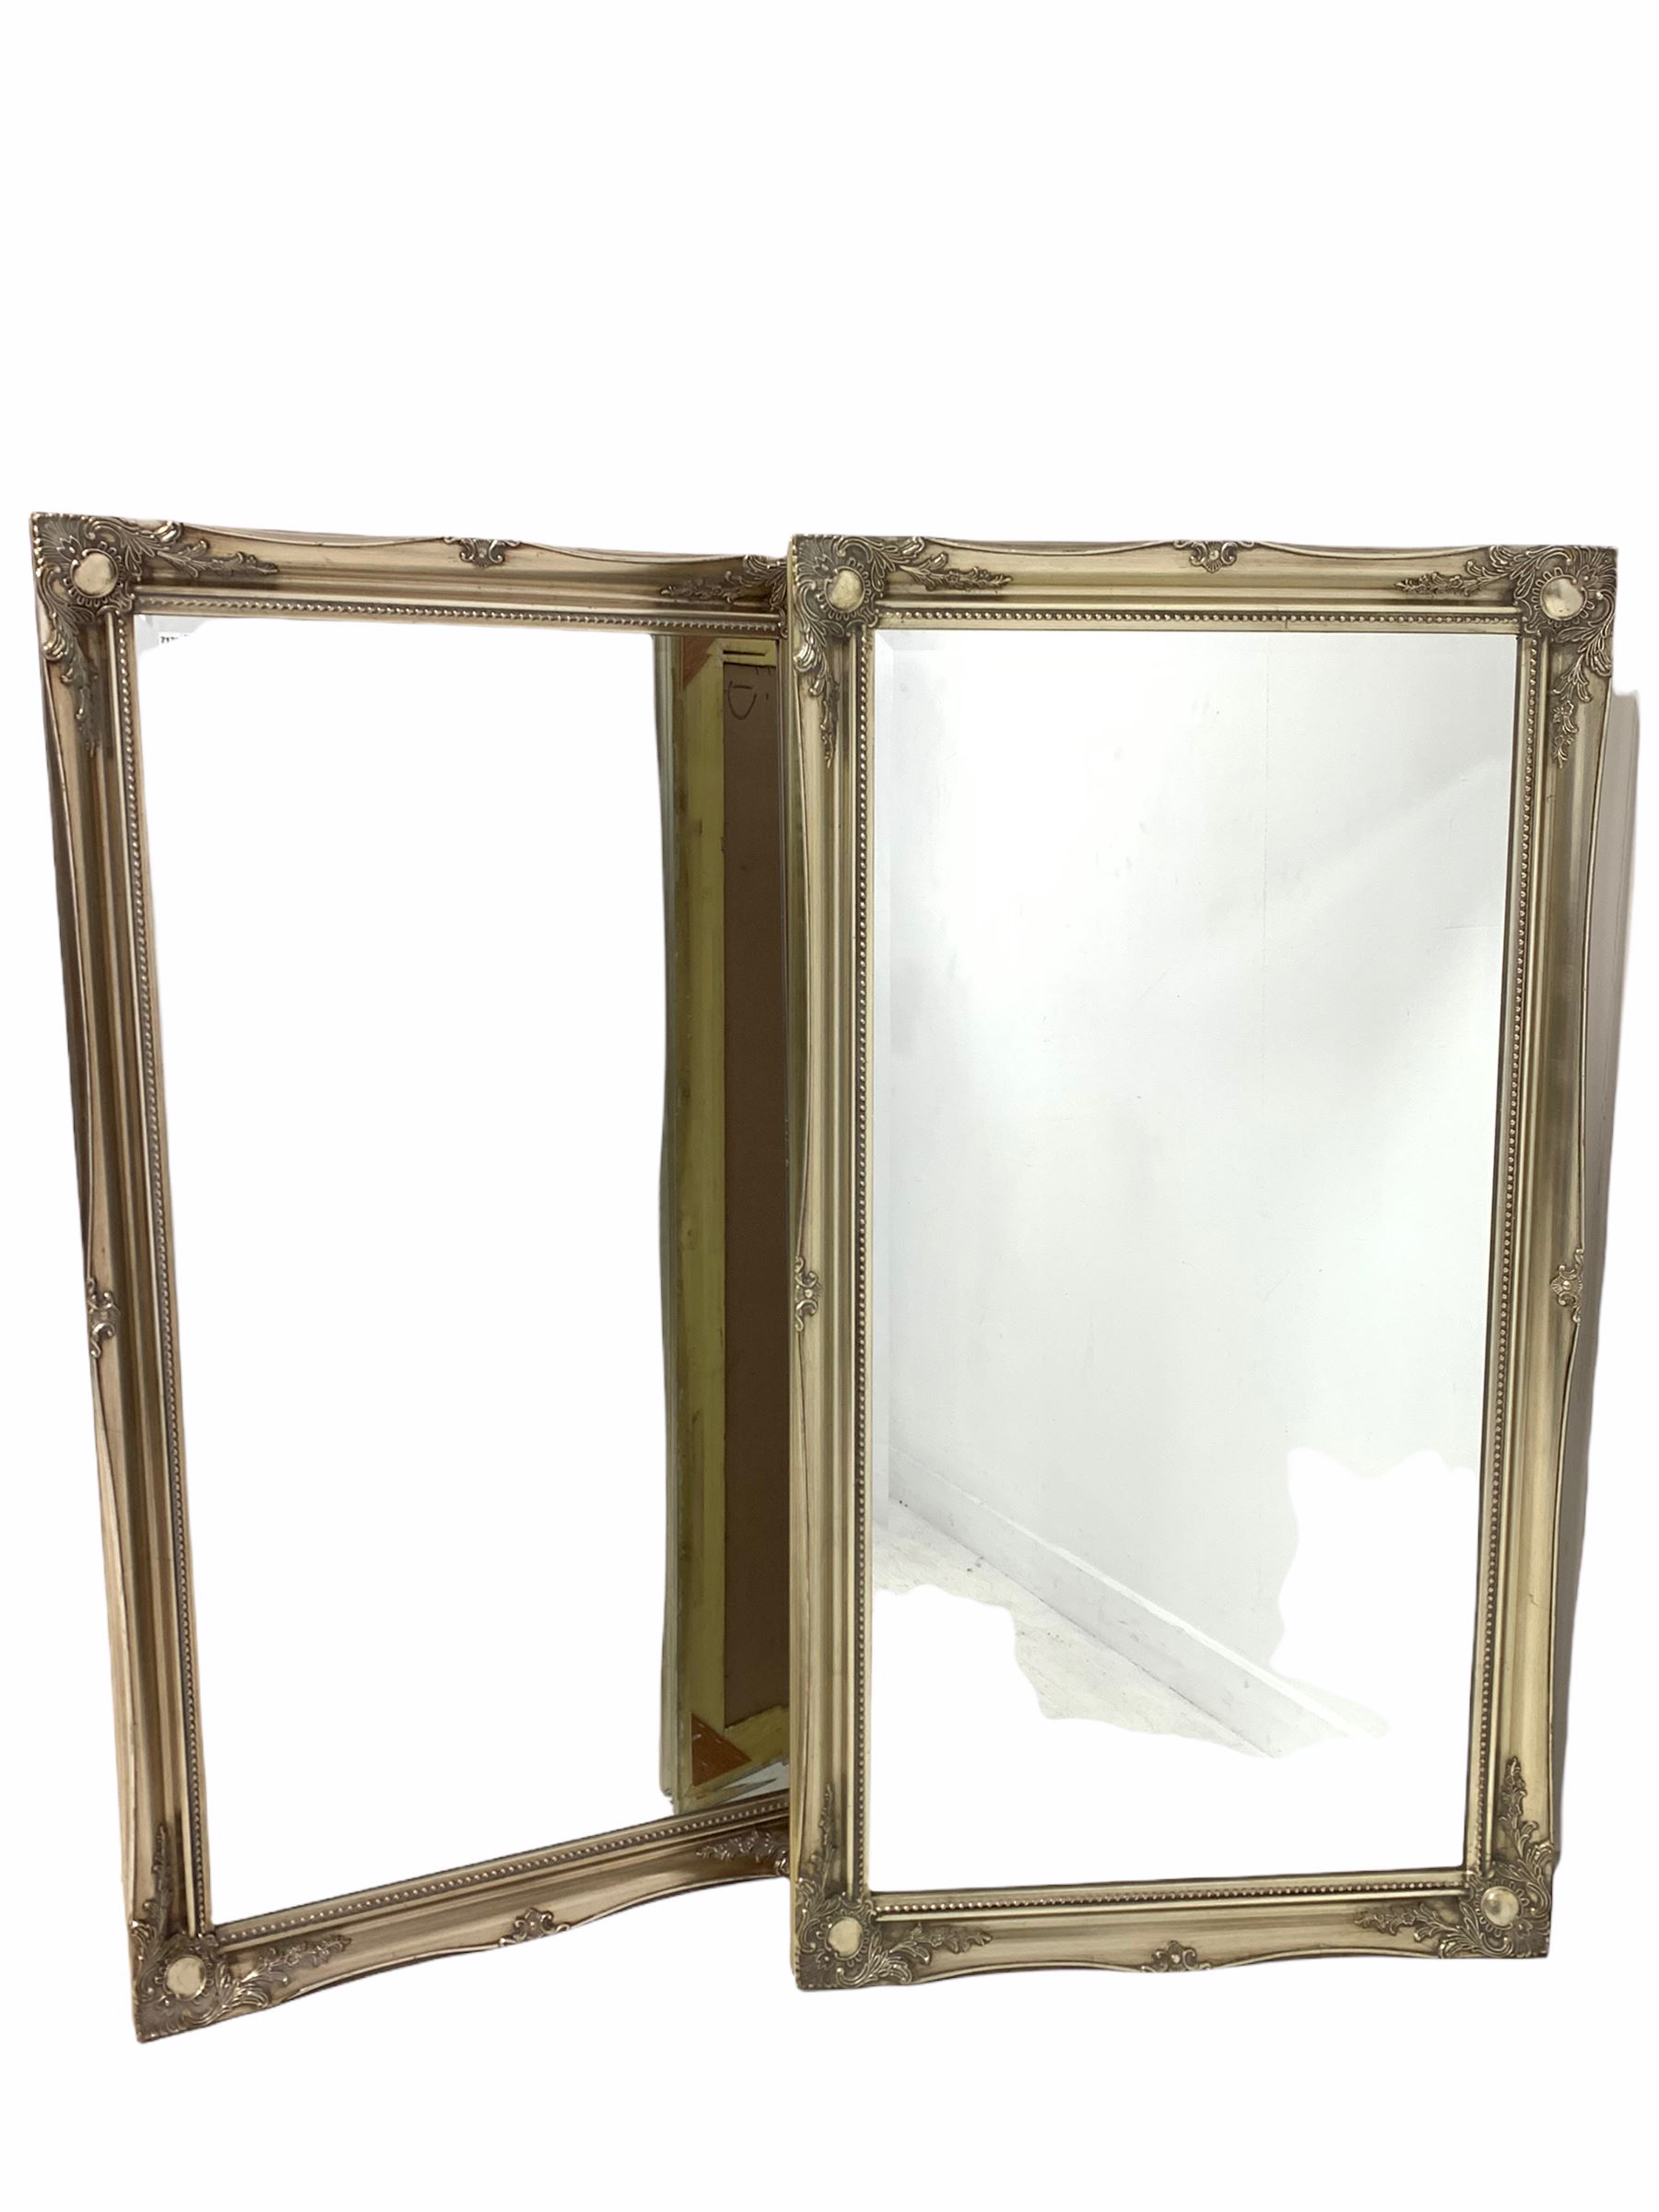 Pair of bevel edged wall mirrors in a swept silver gilt floral moulded frames 75cm x 137cm